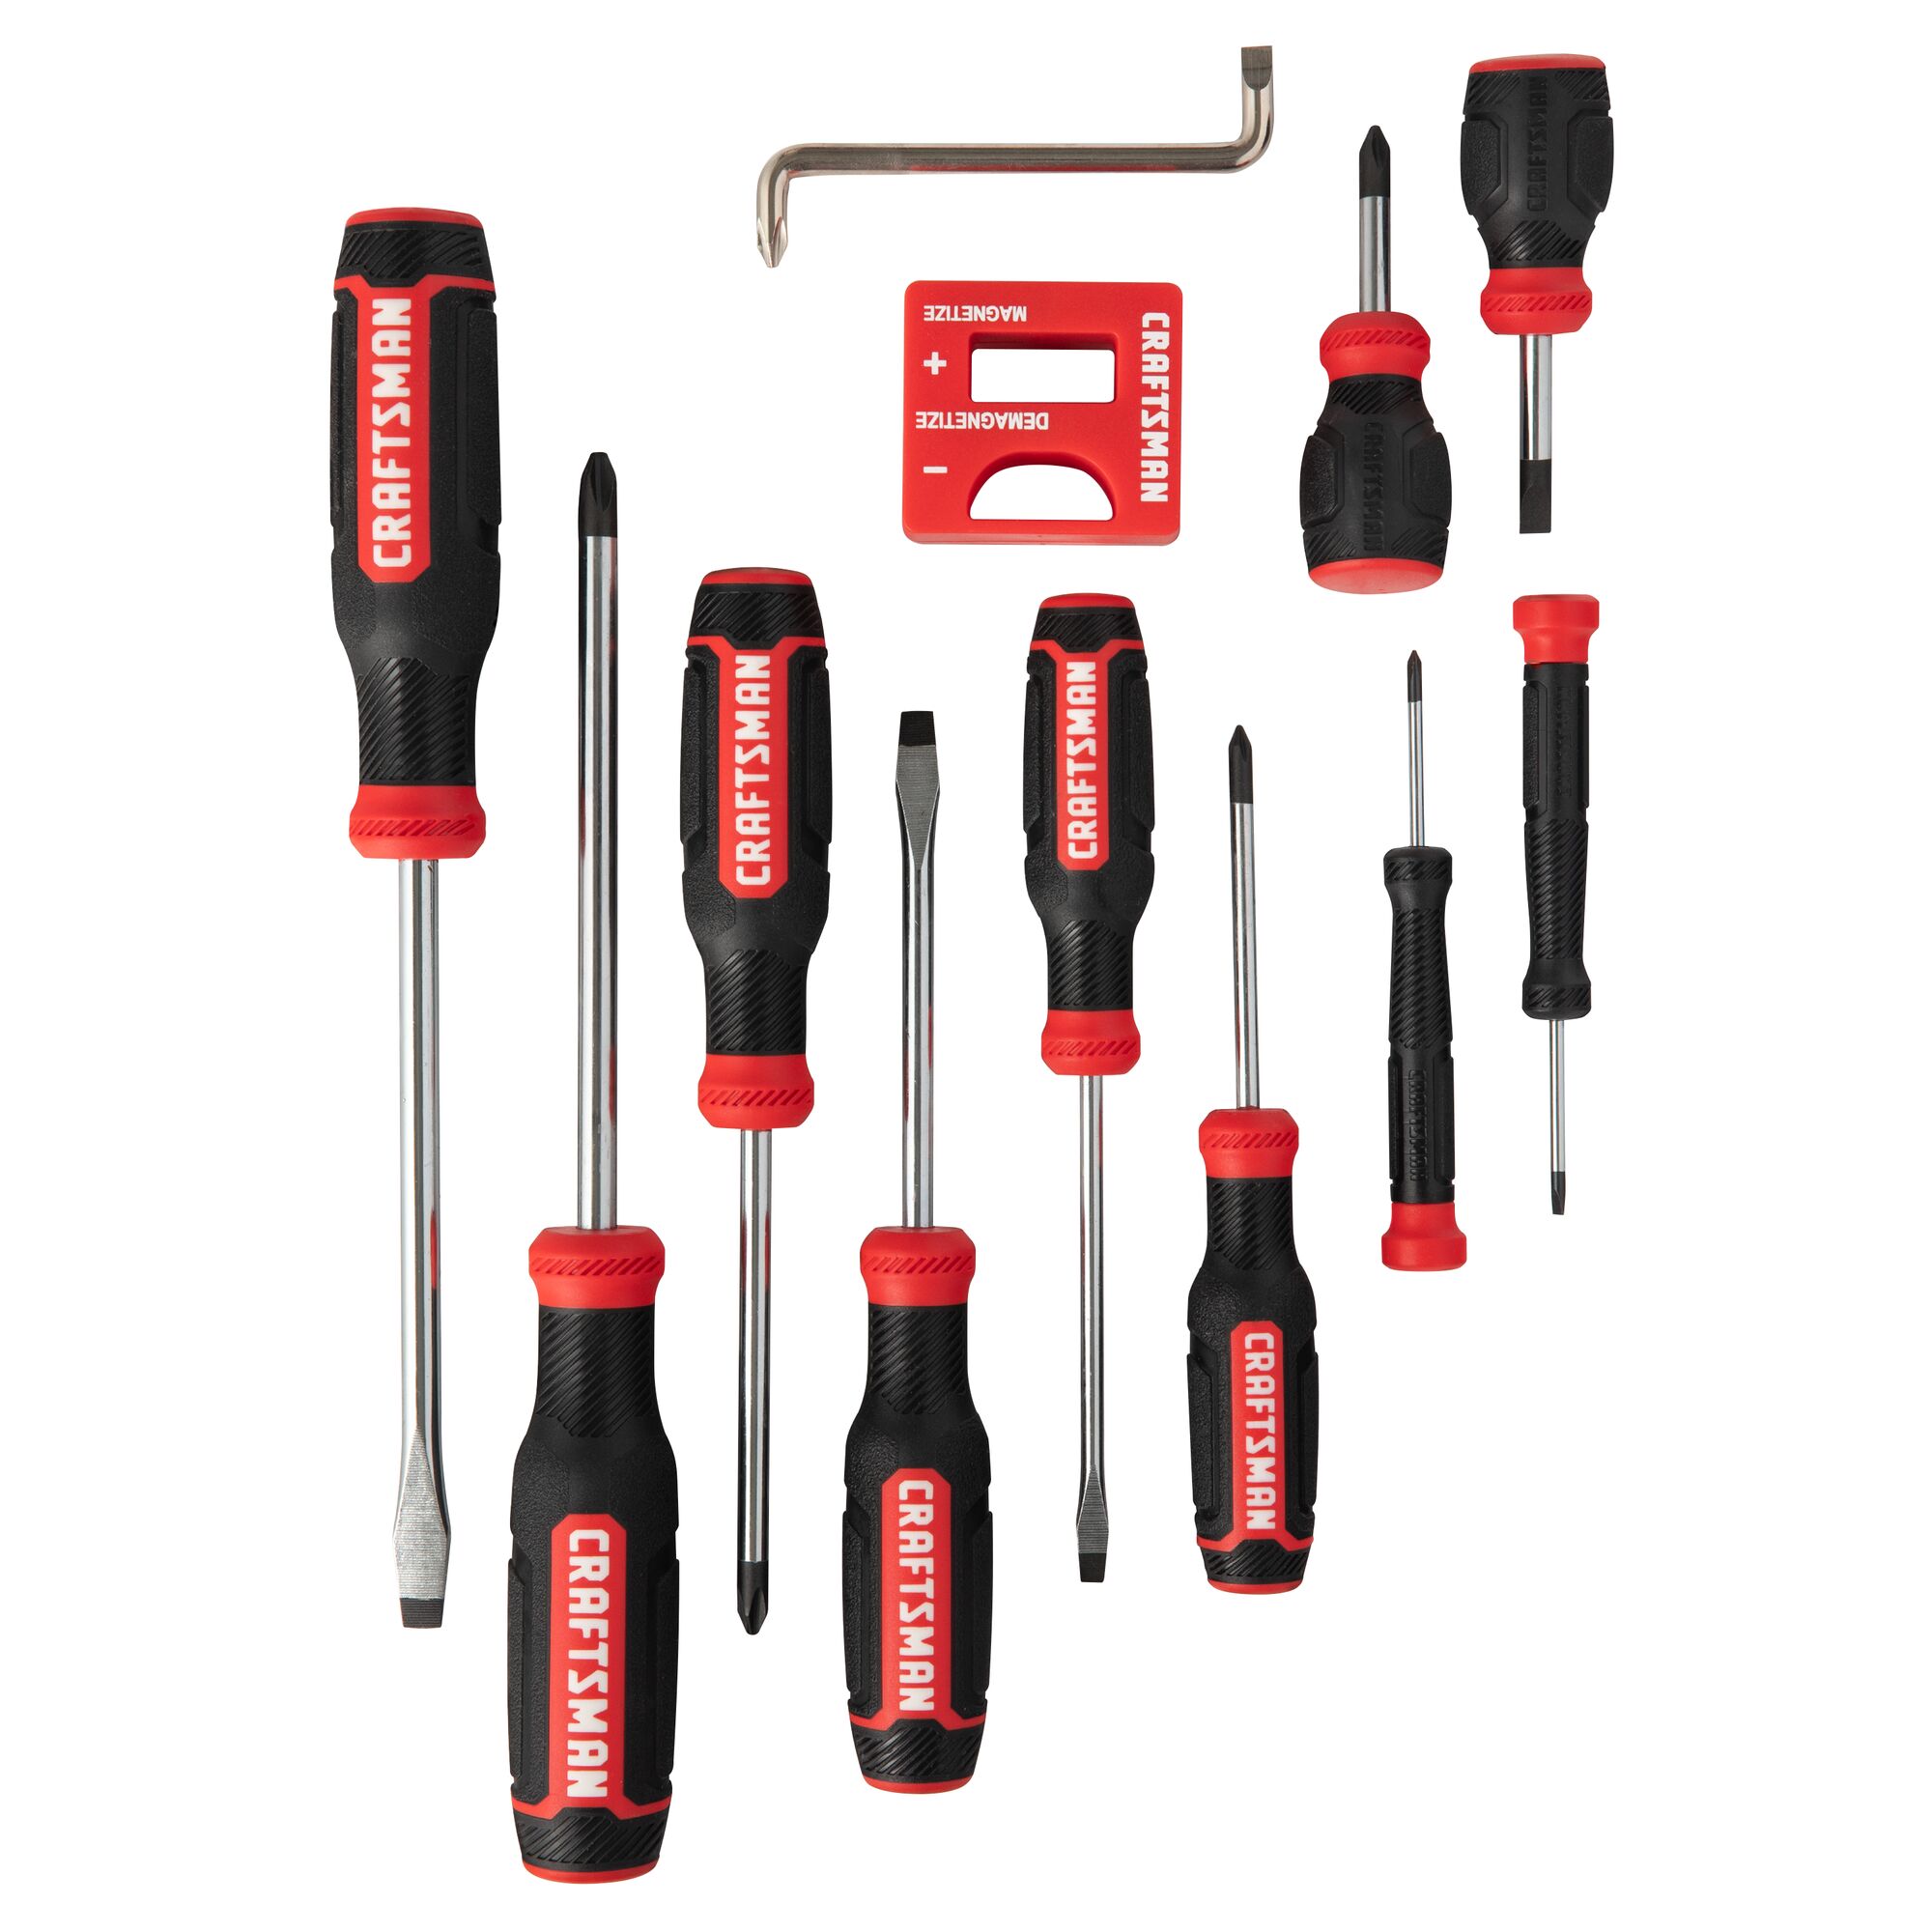 View of CRAFTSMAN Screwdrivers: Bi-Material on white background